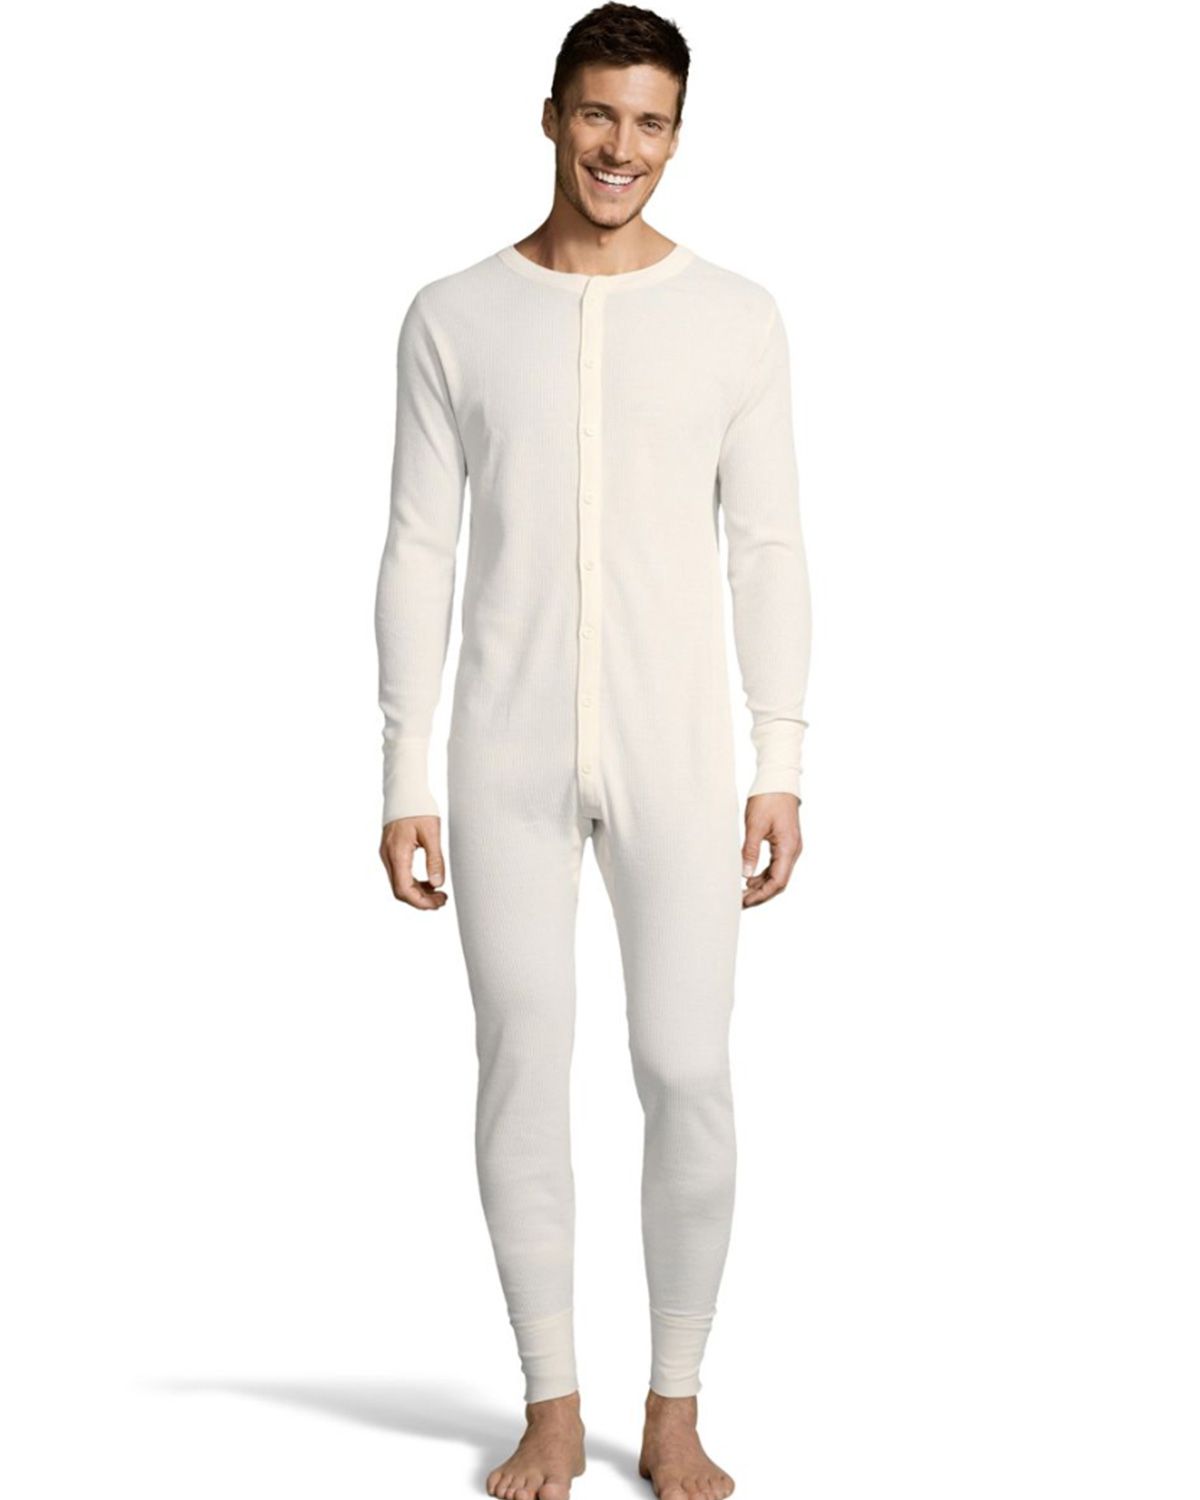 Hanes 125447 Mens Solid Waffle Knit Thermal Union Suit